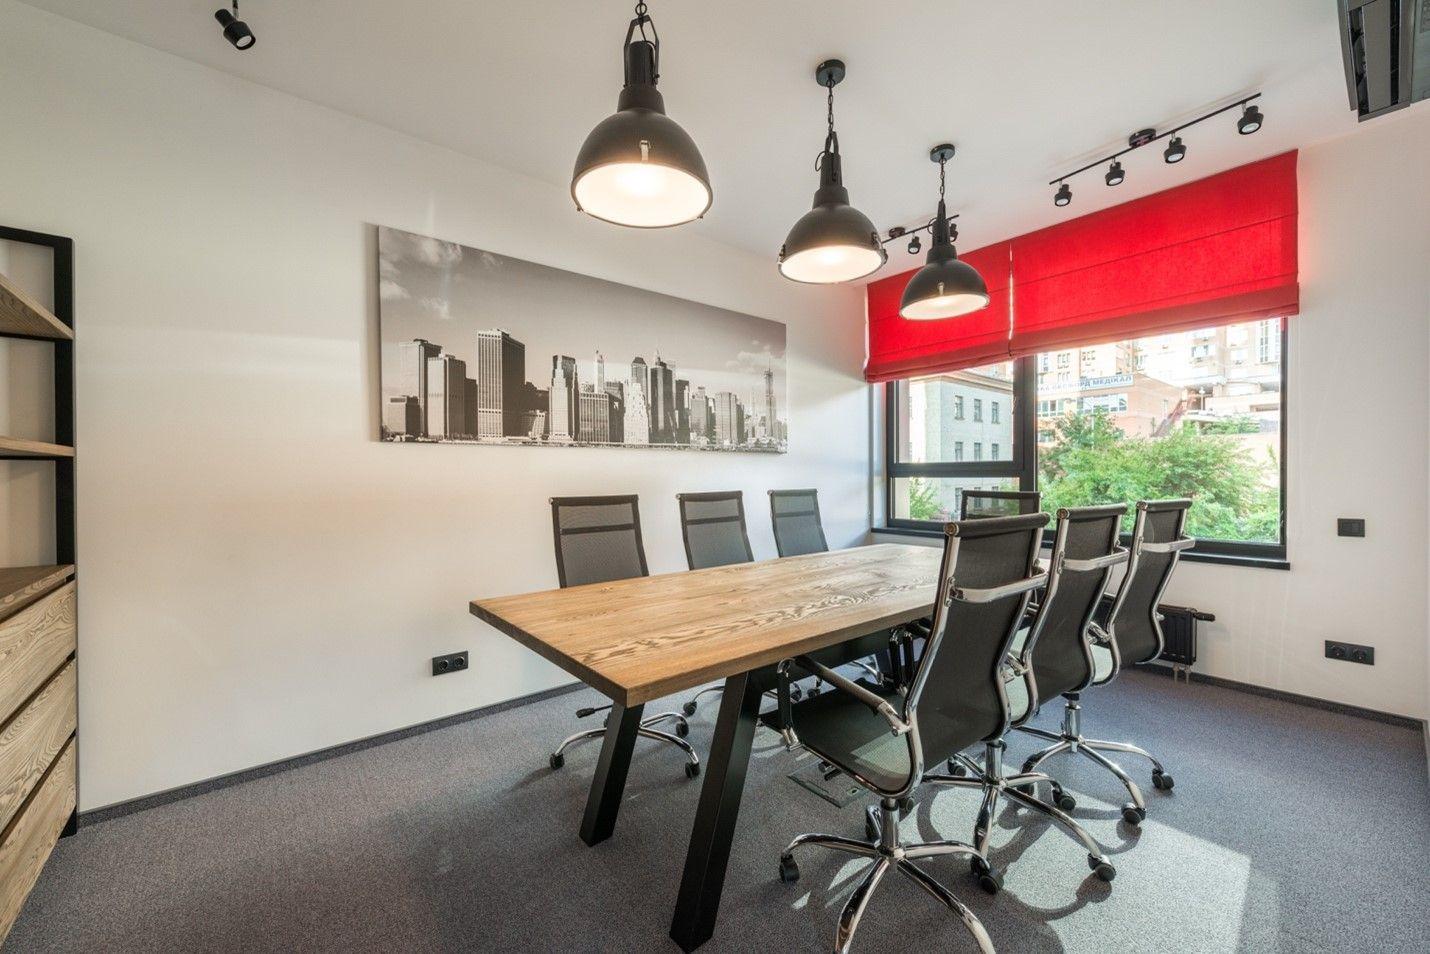 Serviced Office vs. Shared Office: Differences, Benefits, Pros & Cons